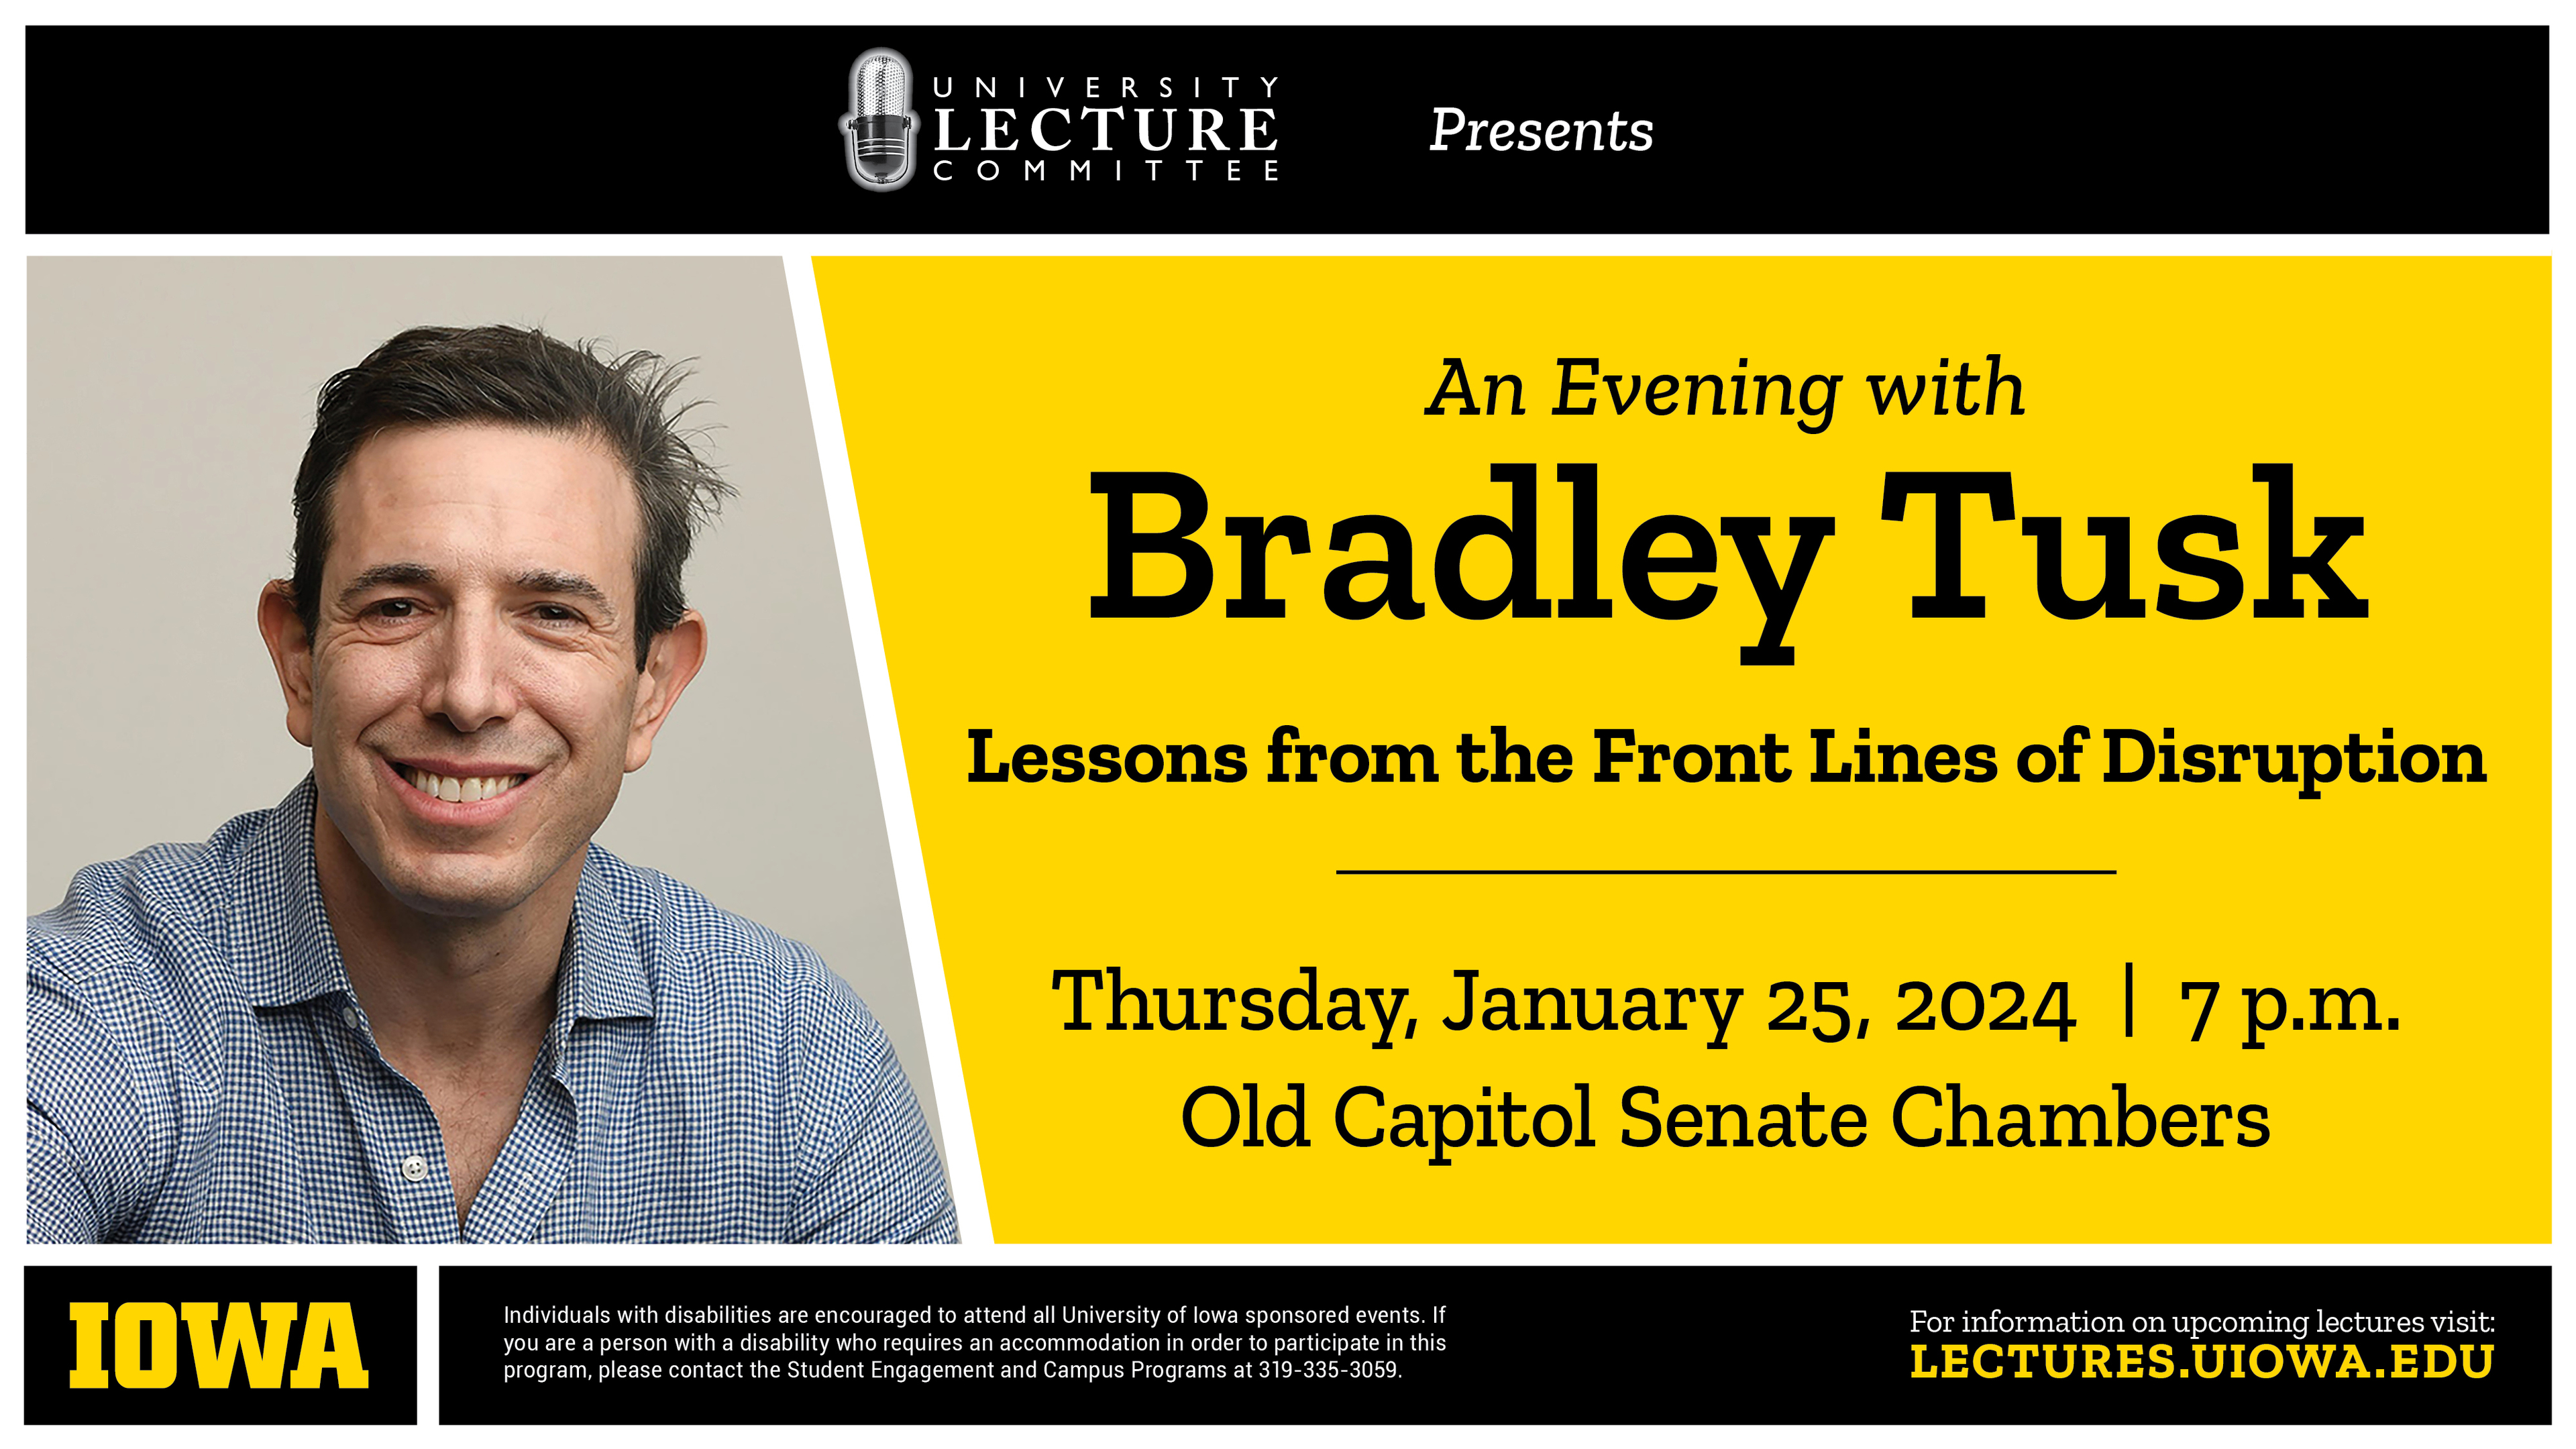 University Lecture Committee Presents: An Evening with Bradley Tusk